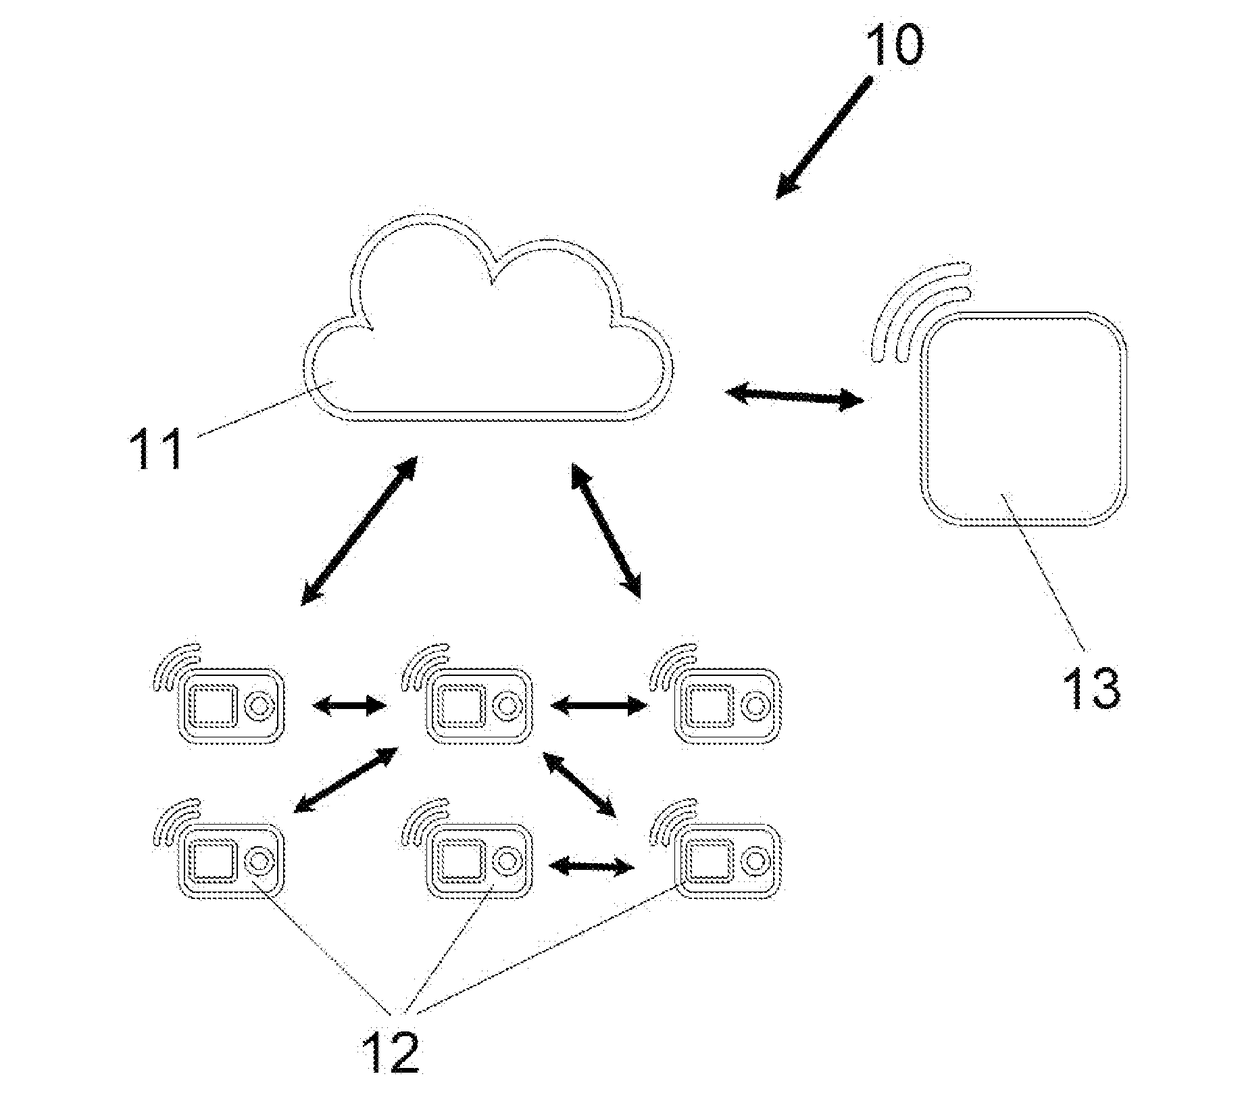 Monitoring an Area using Multiple Networked Video Cameras